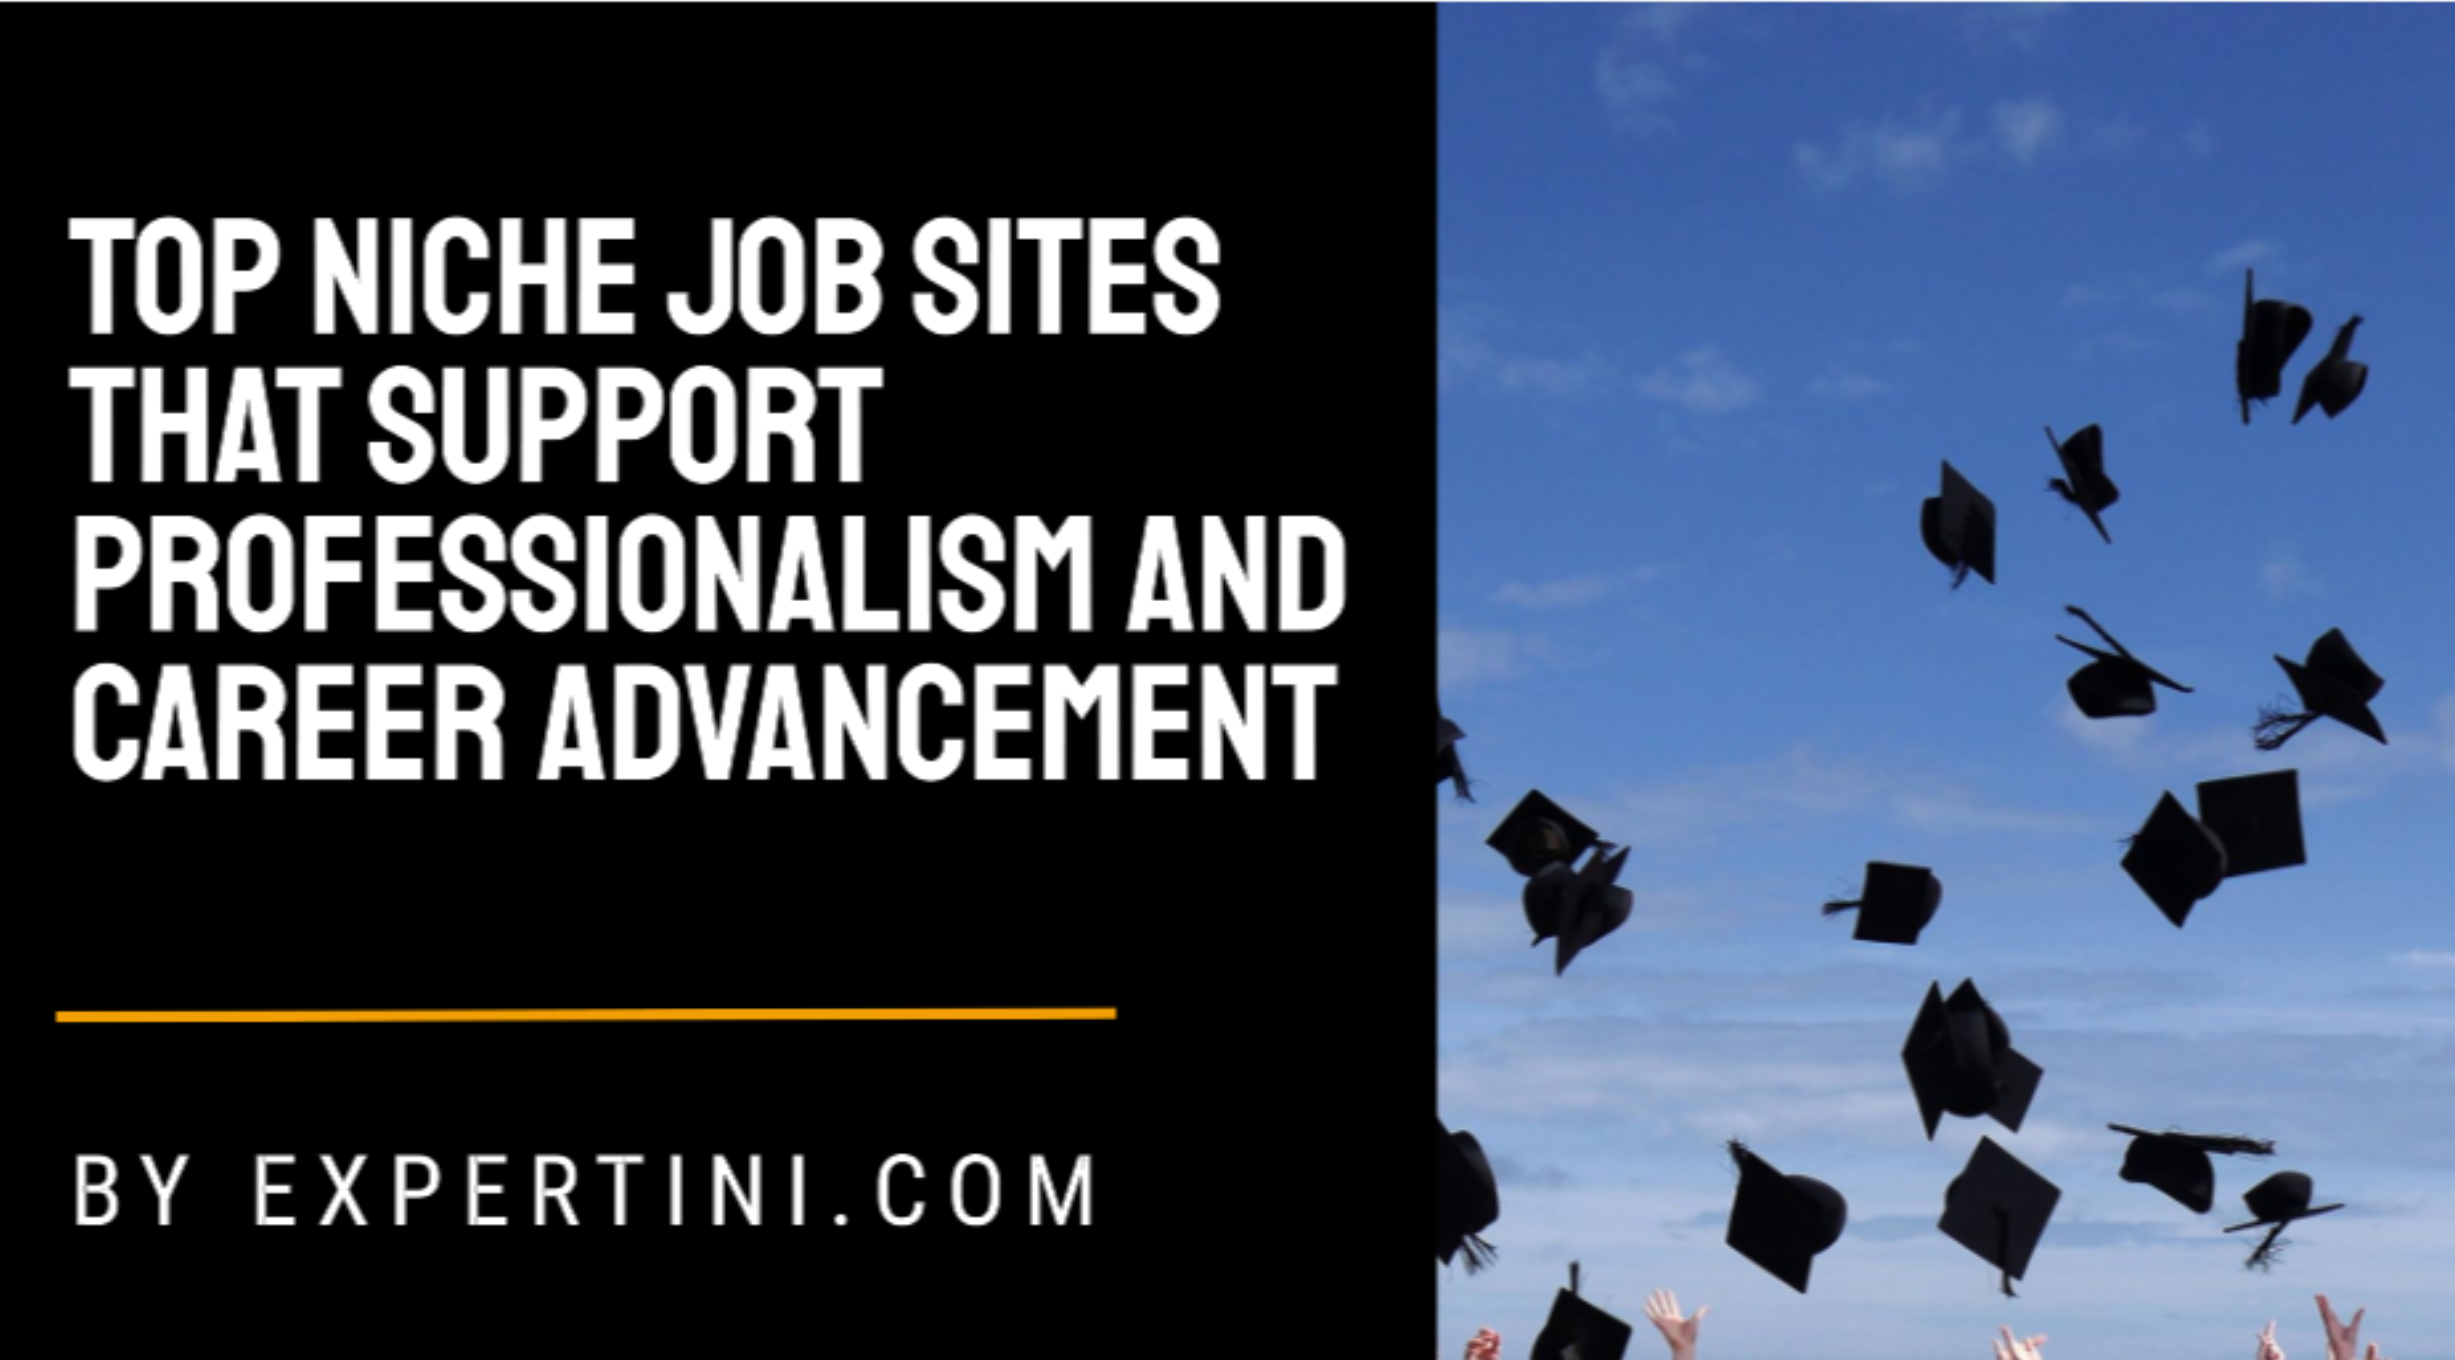 275 Top Niche Job Sites That Support Professionalism and Career Advancement for United States